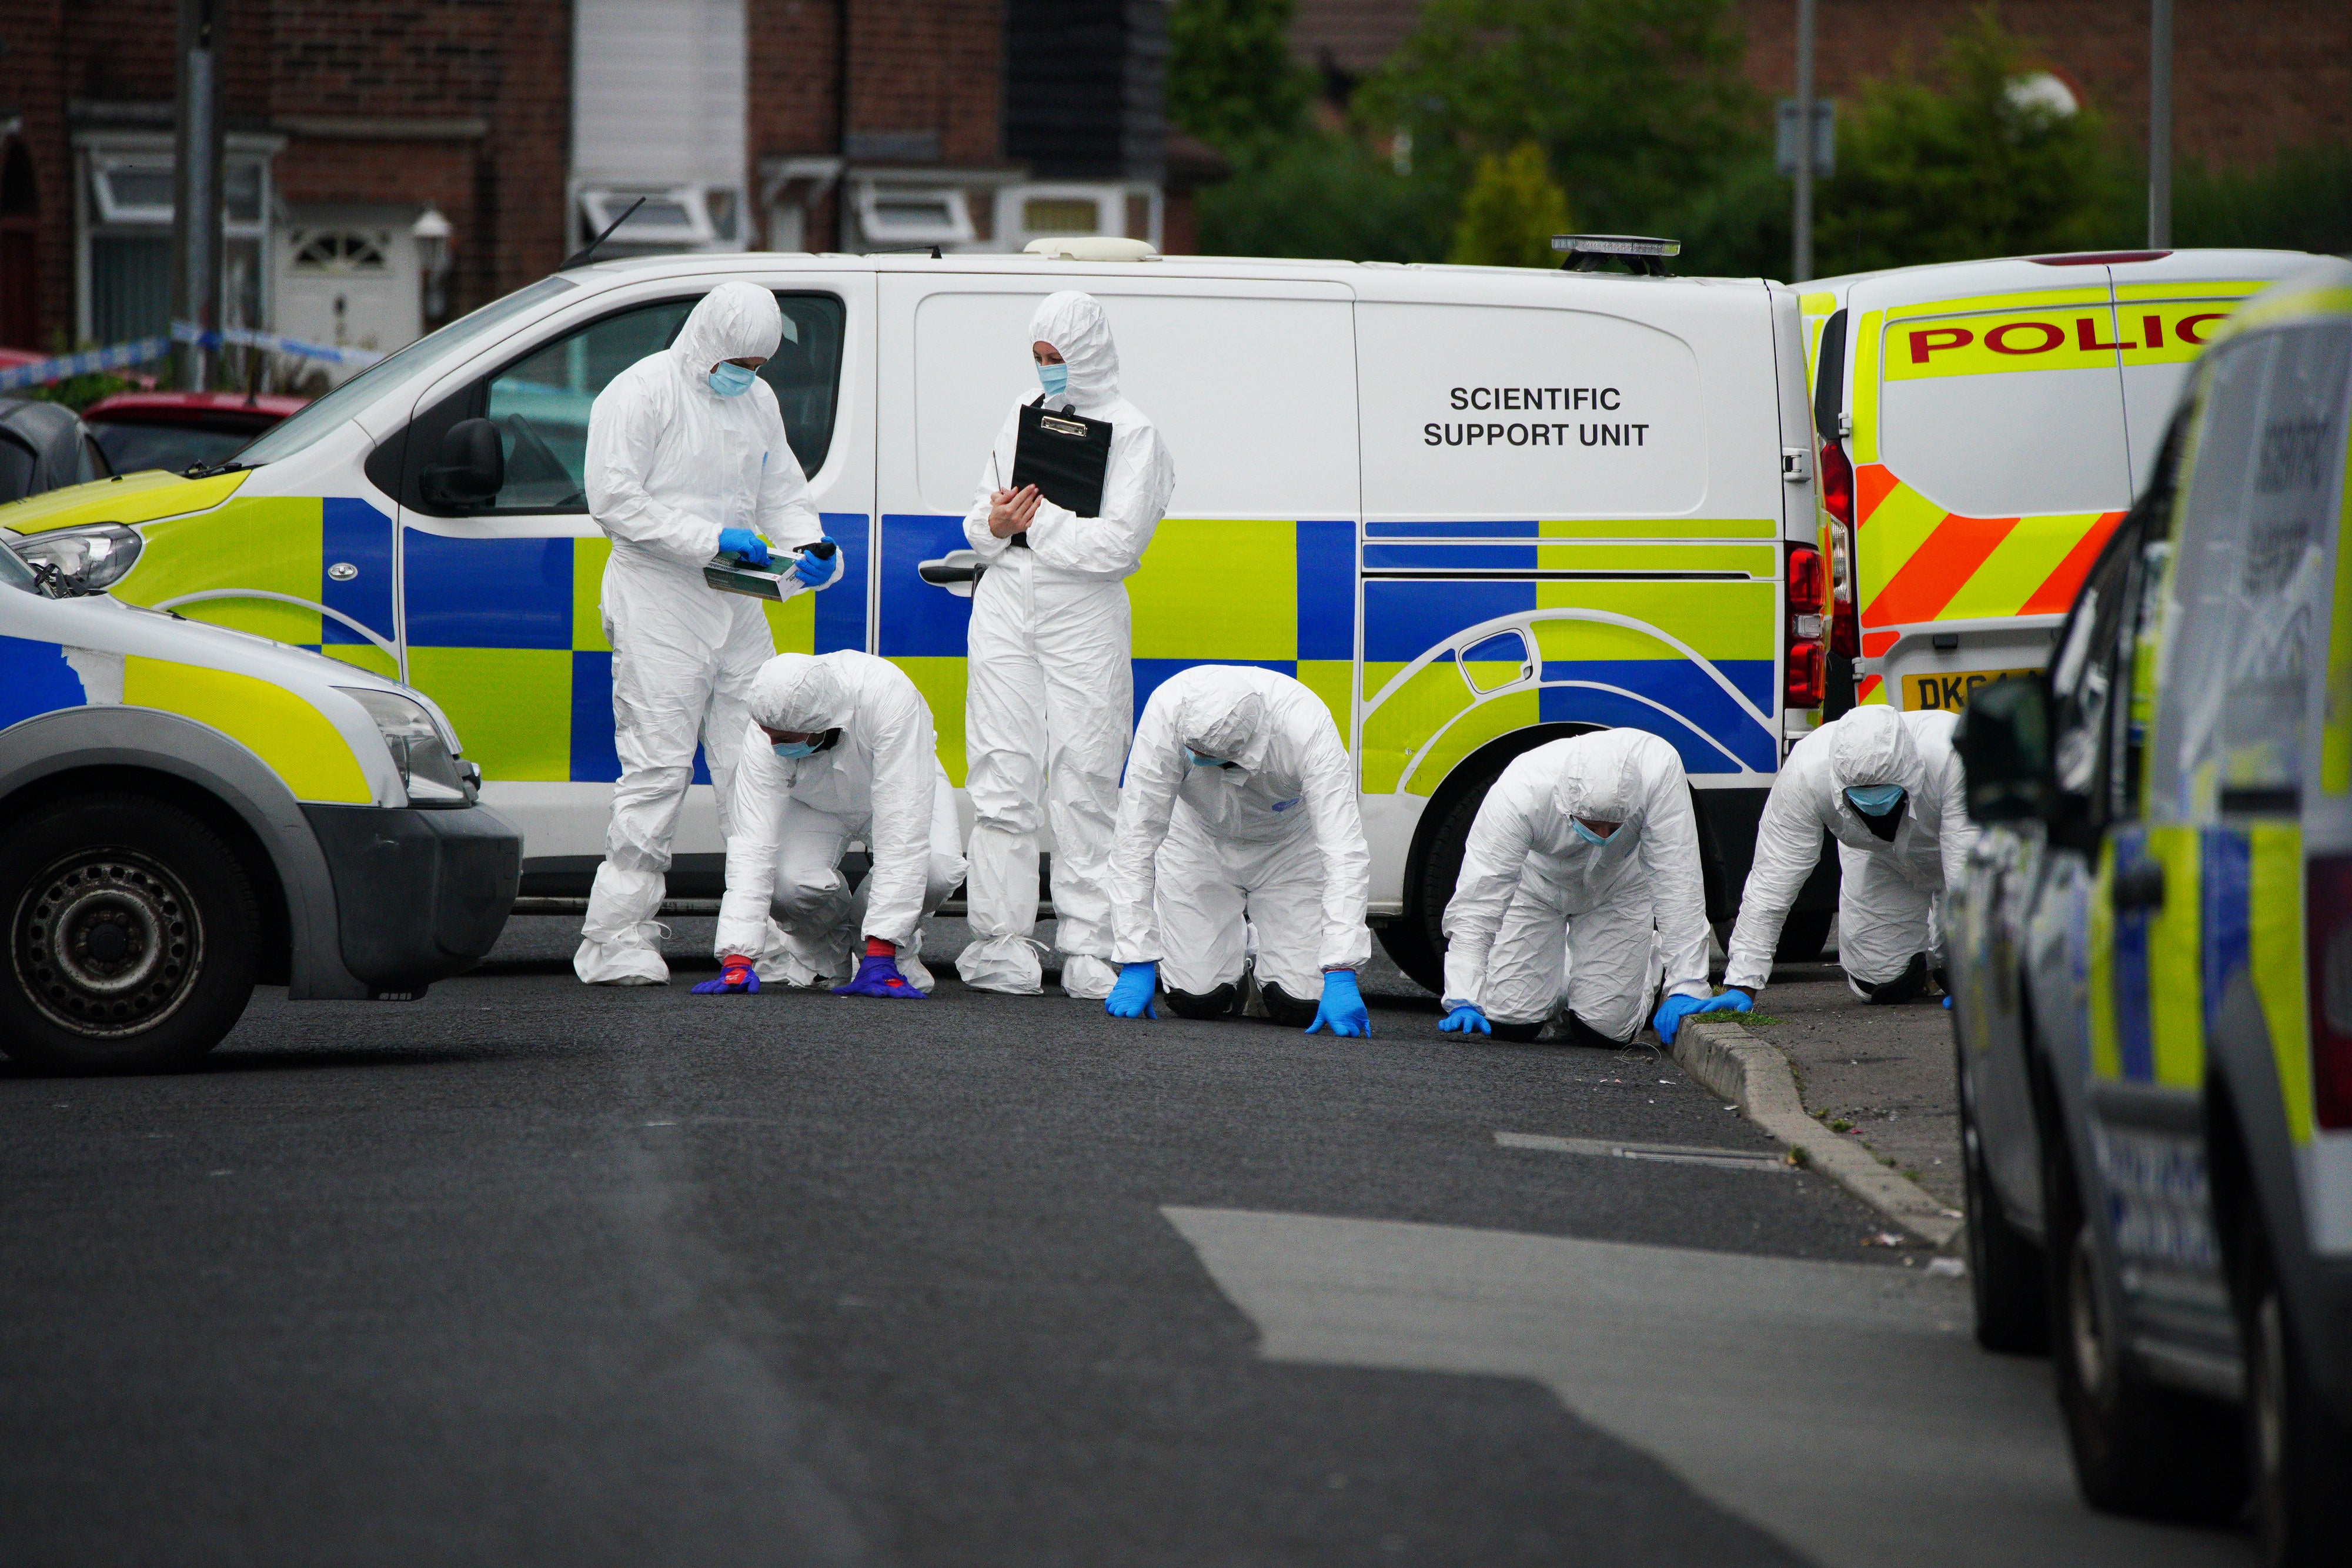 Forensic officers were sent to the scene following the shootings